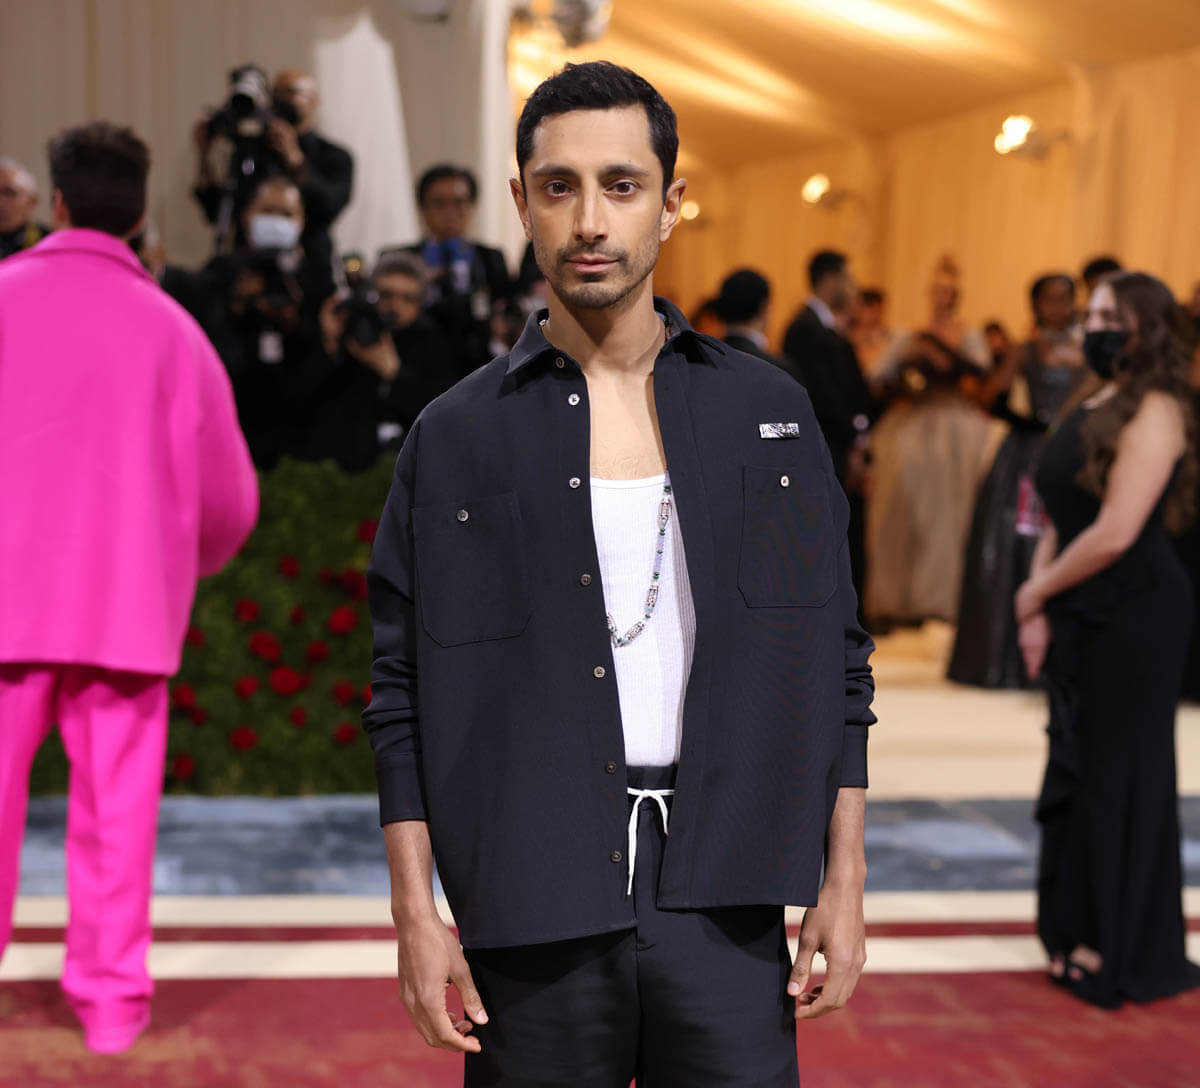 Riz Ahmed, Quannah Chasinghorse, and the Condé Nast union best captured ...